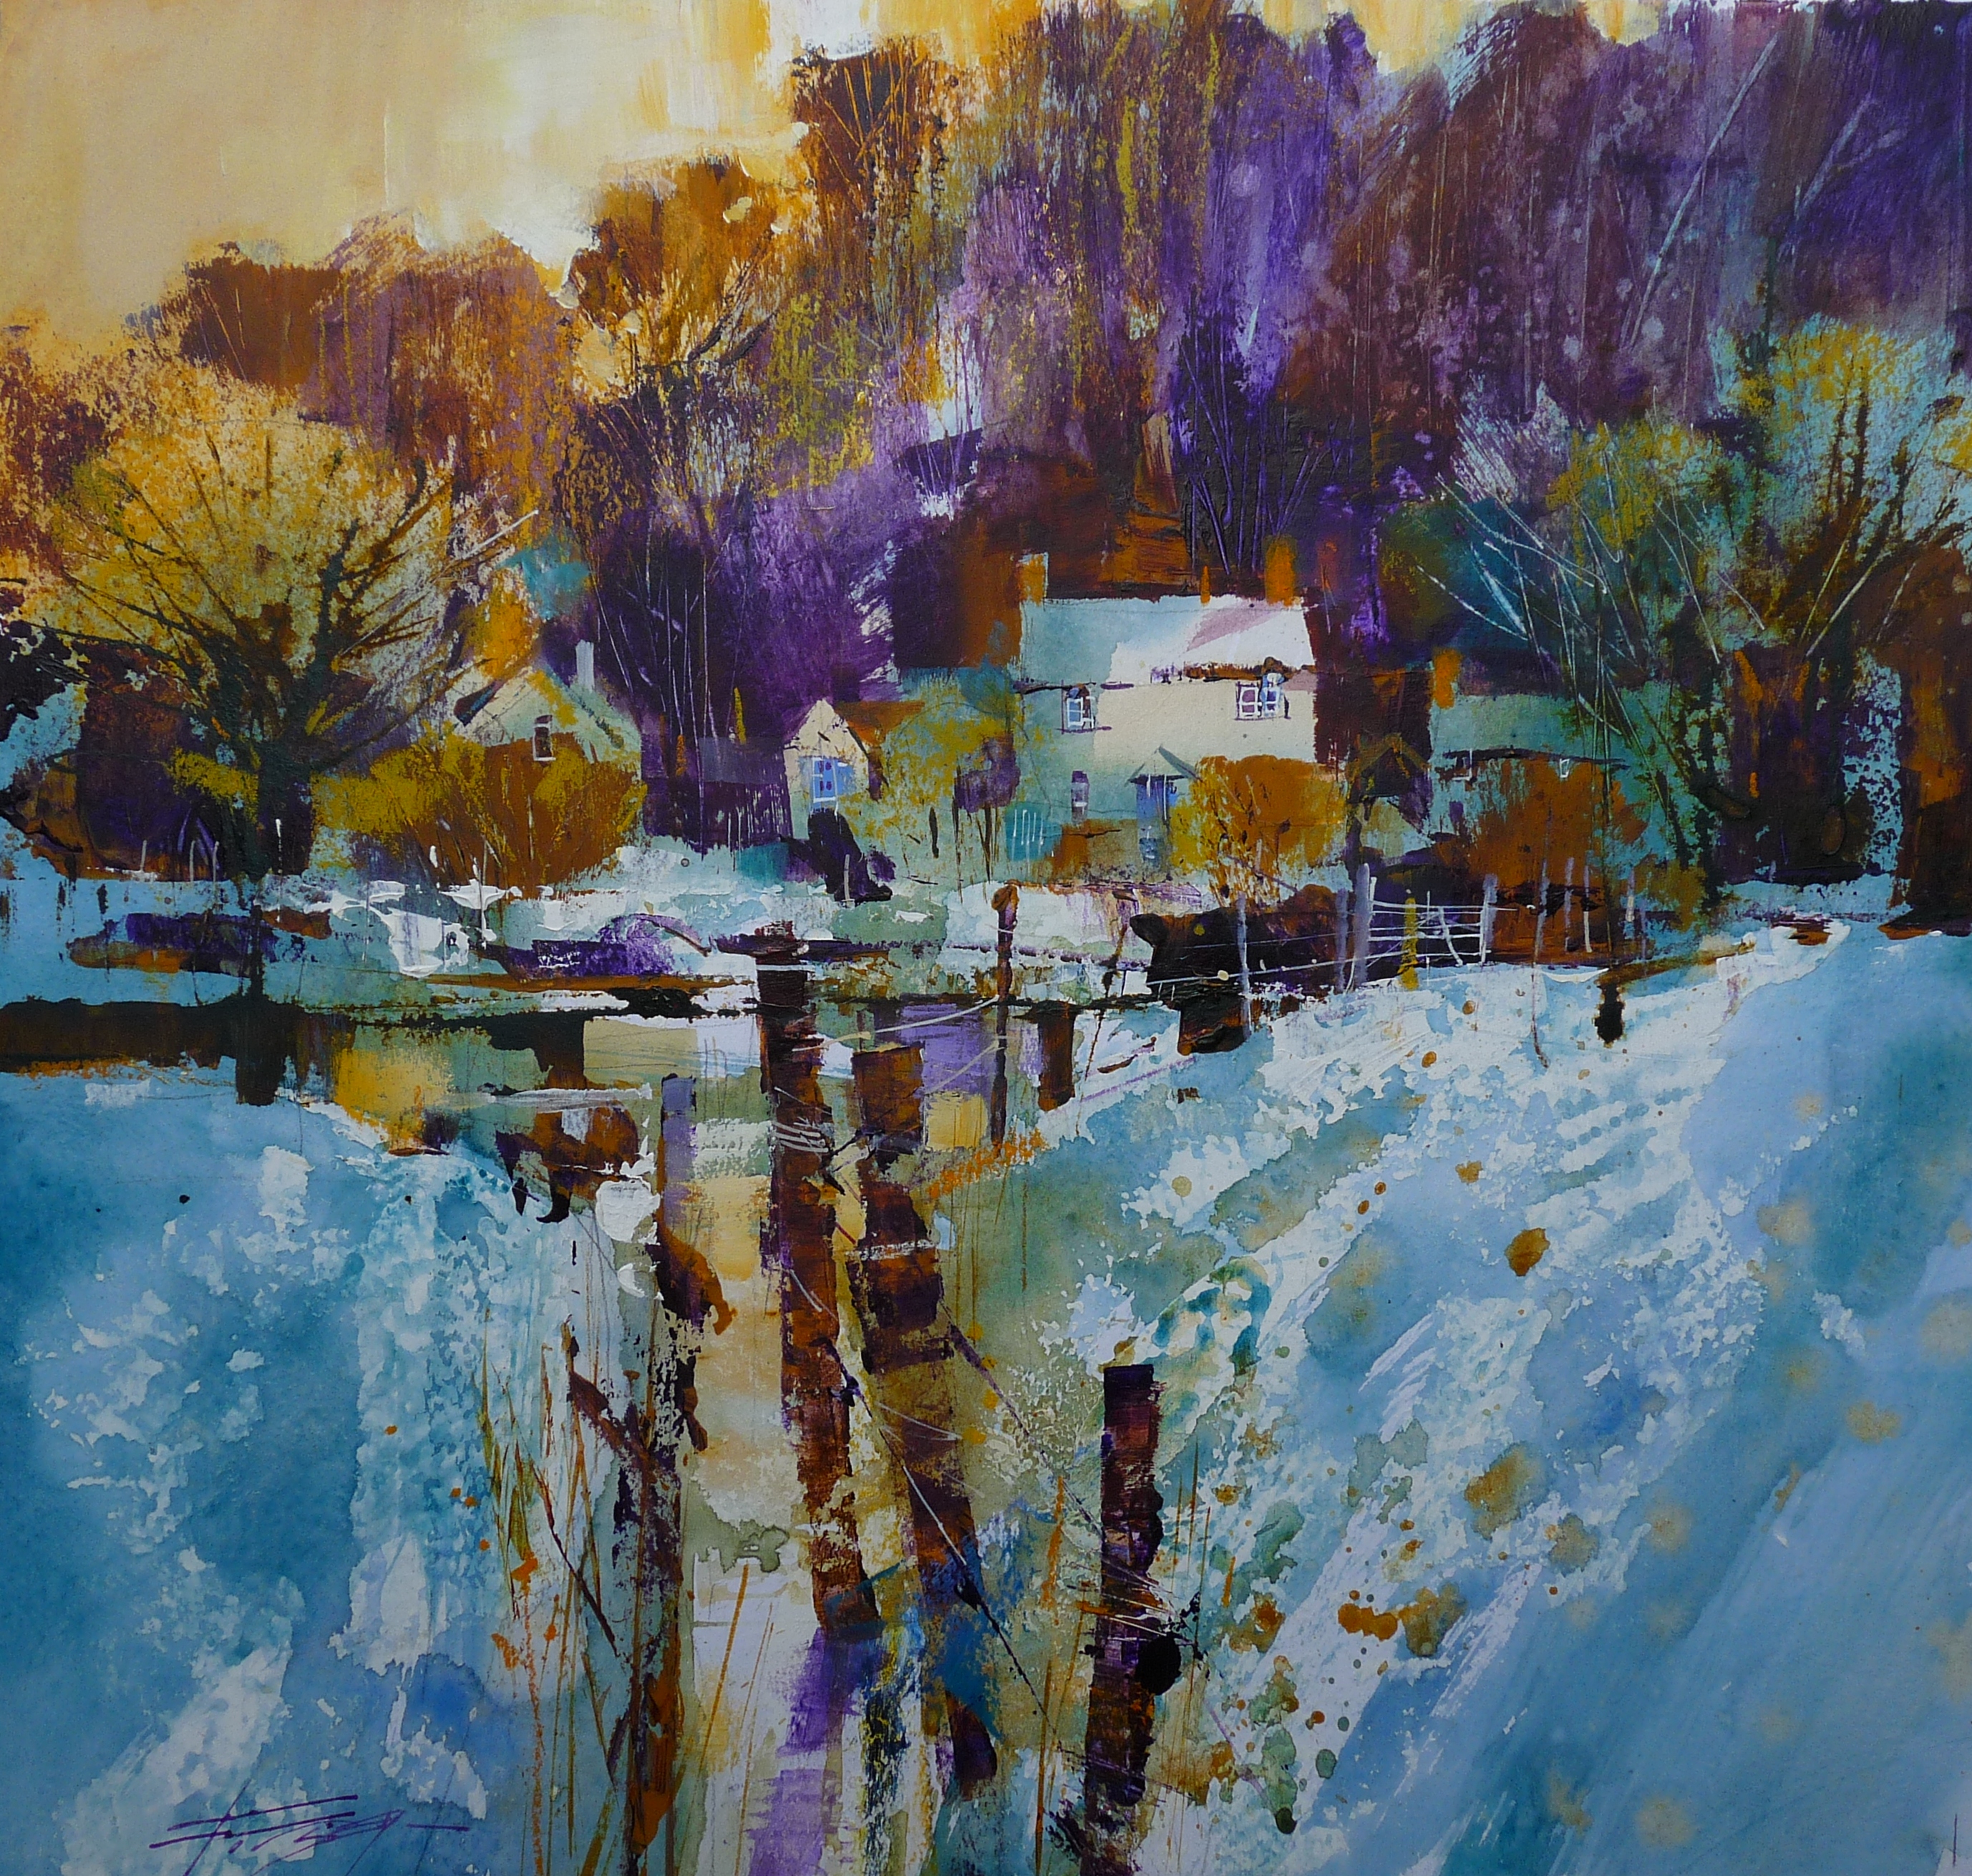 'Beck, Snow and Cottages' by artist Chris Forsey